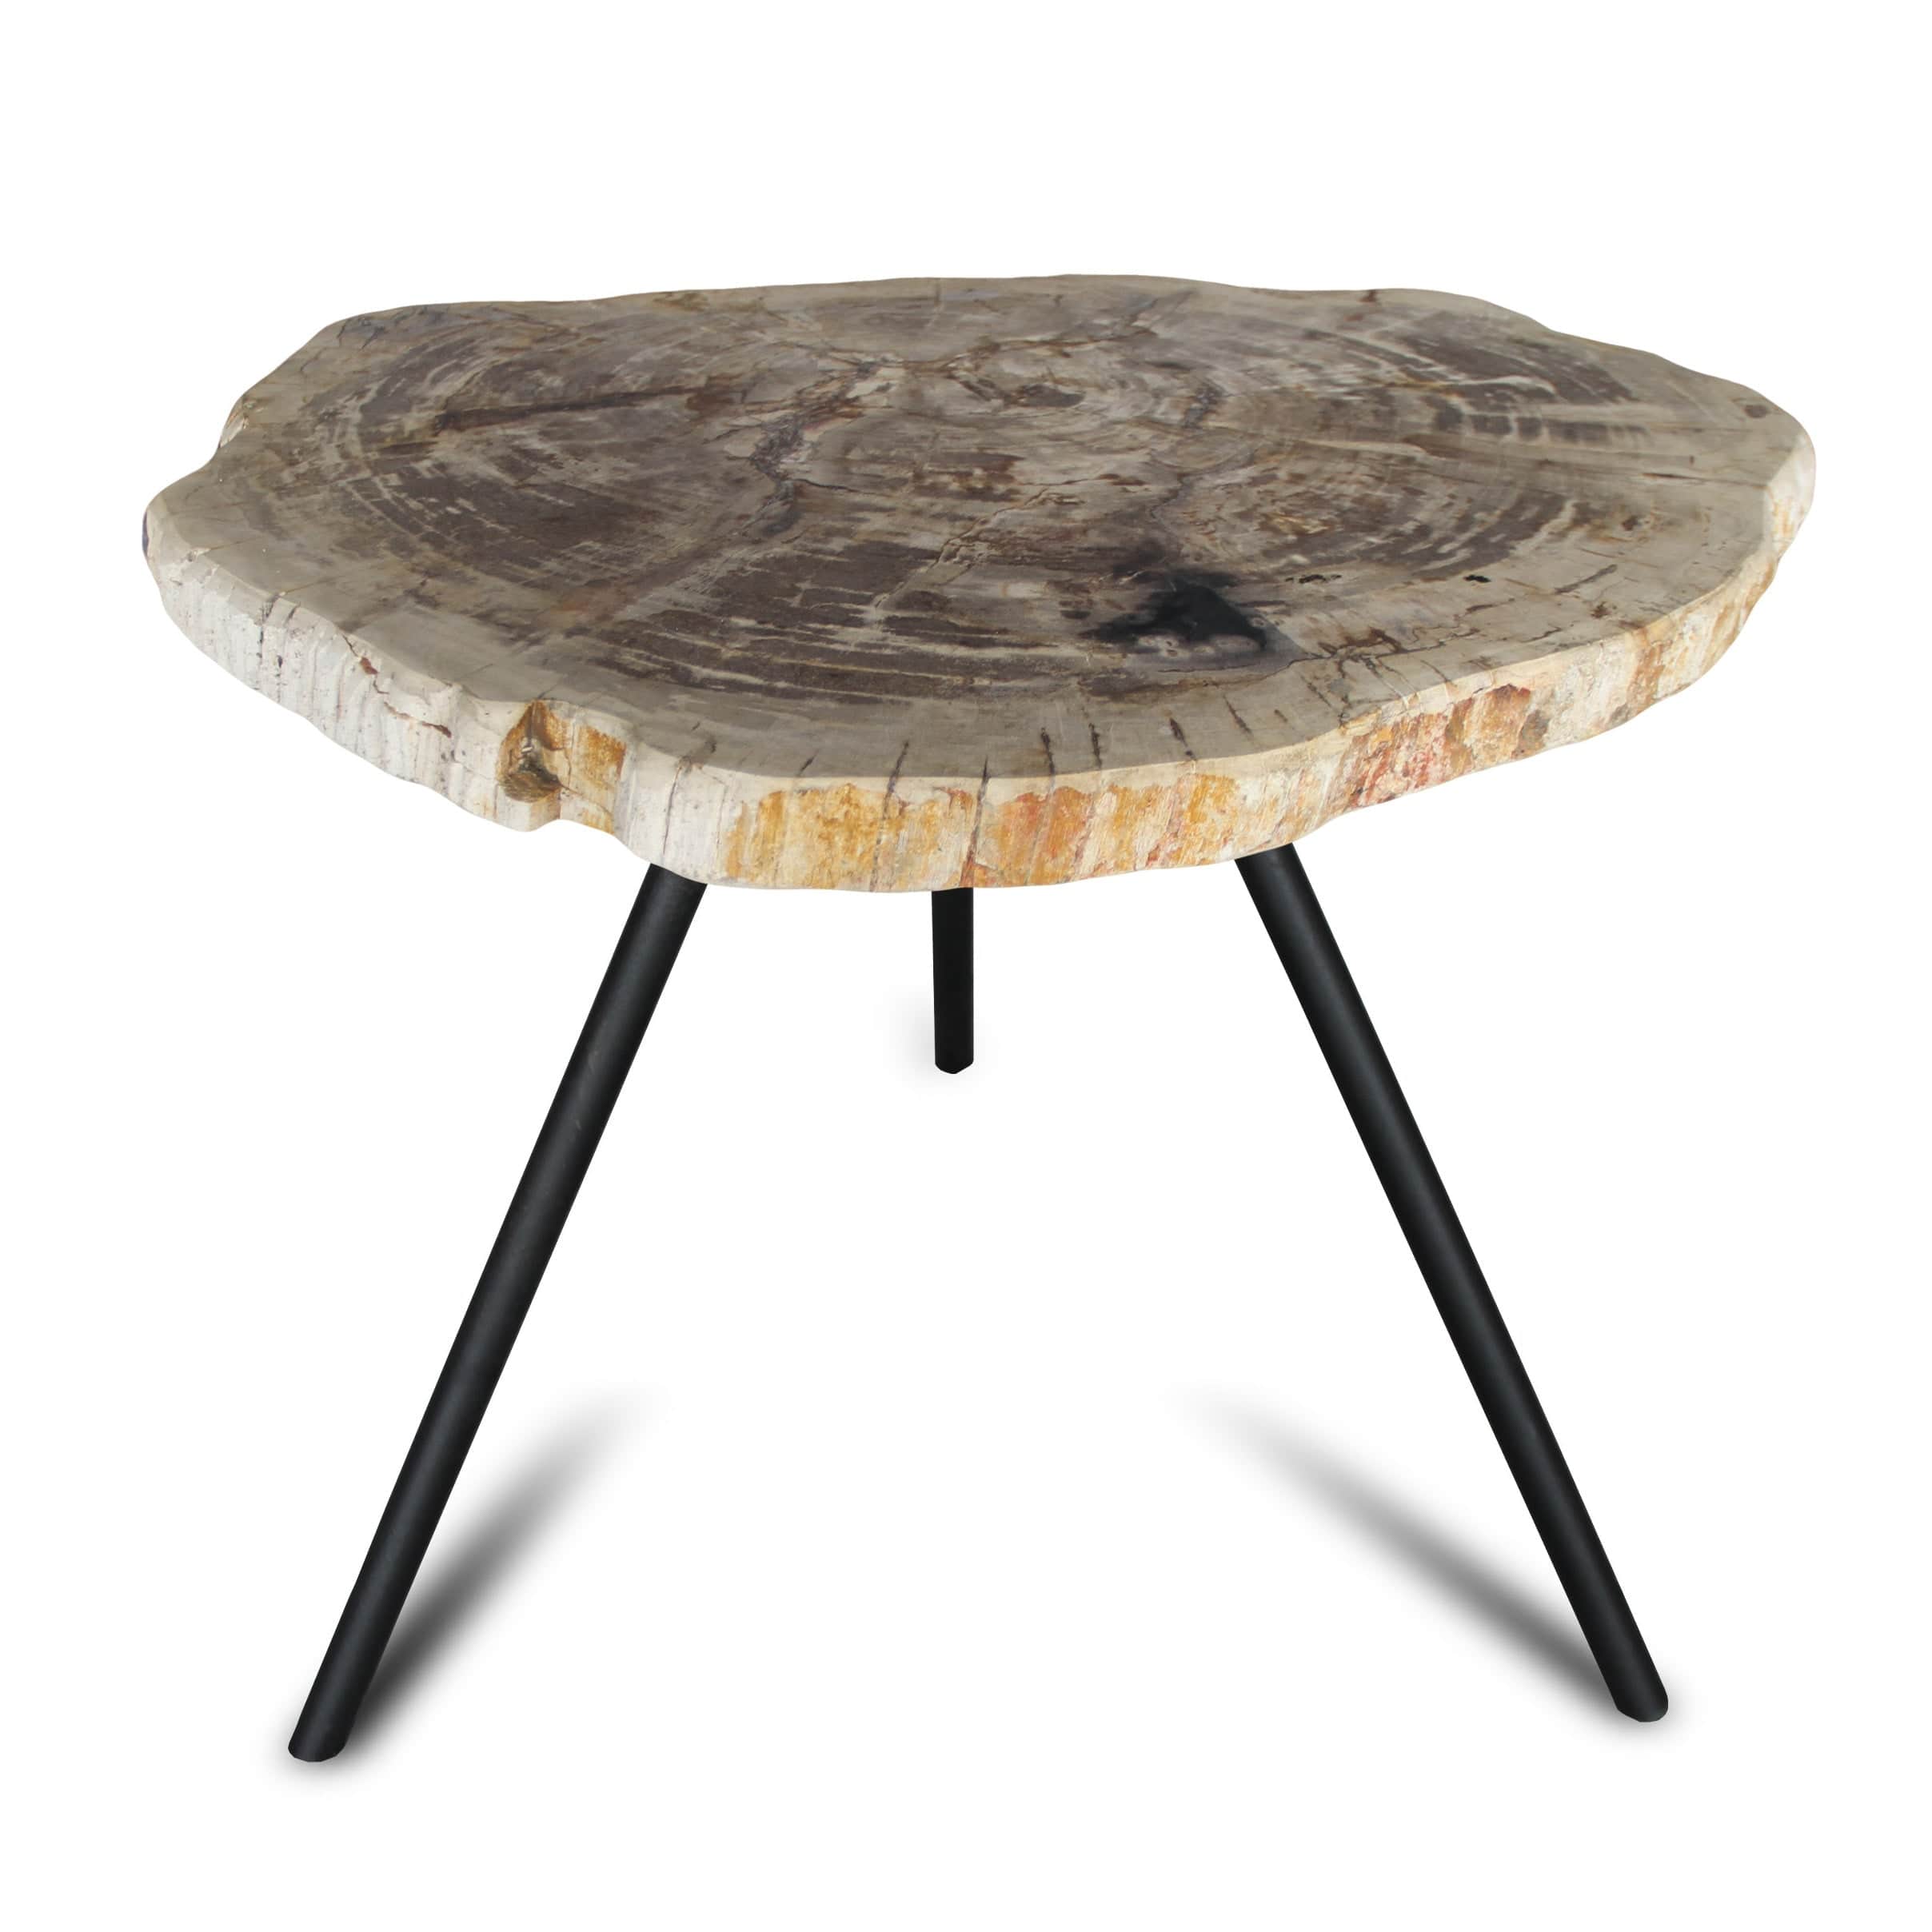 Kalifano Petrified Wood Petrified Wood Round Slice Side Table from Indonesia - 28" / 77 lbs PWT2800.003